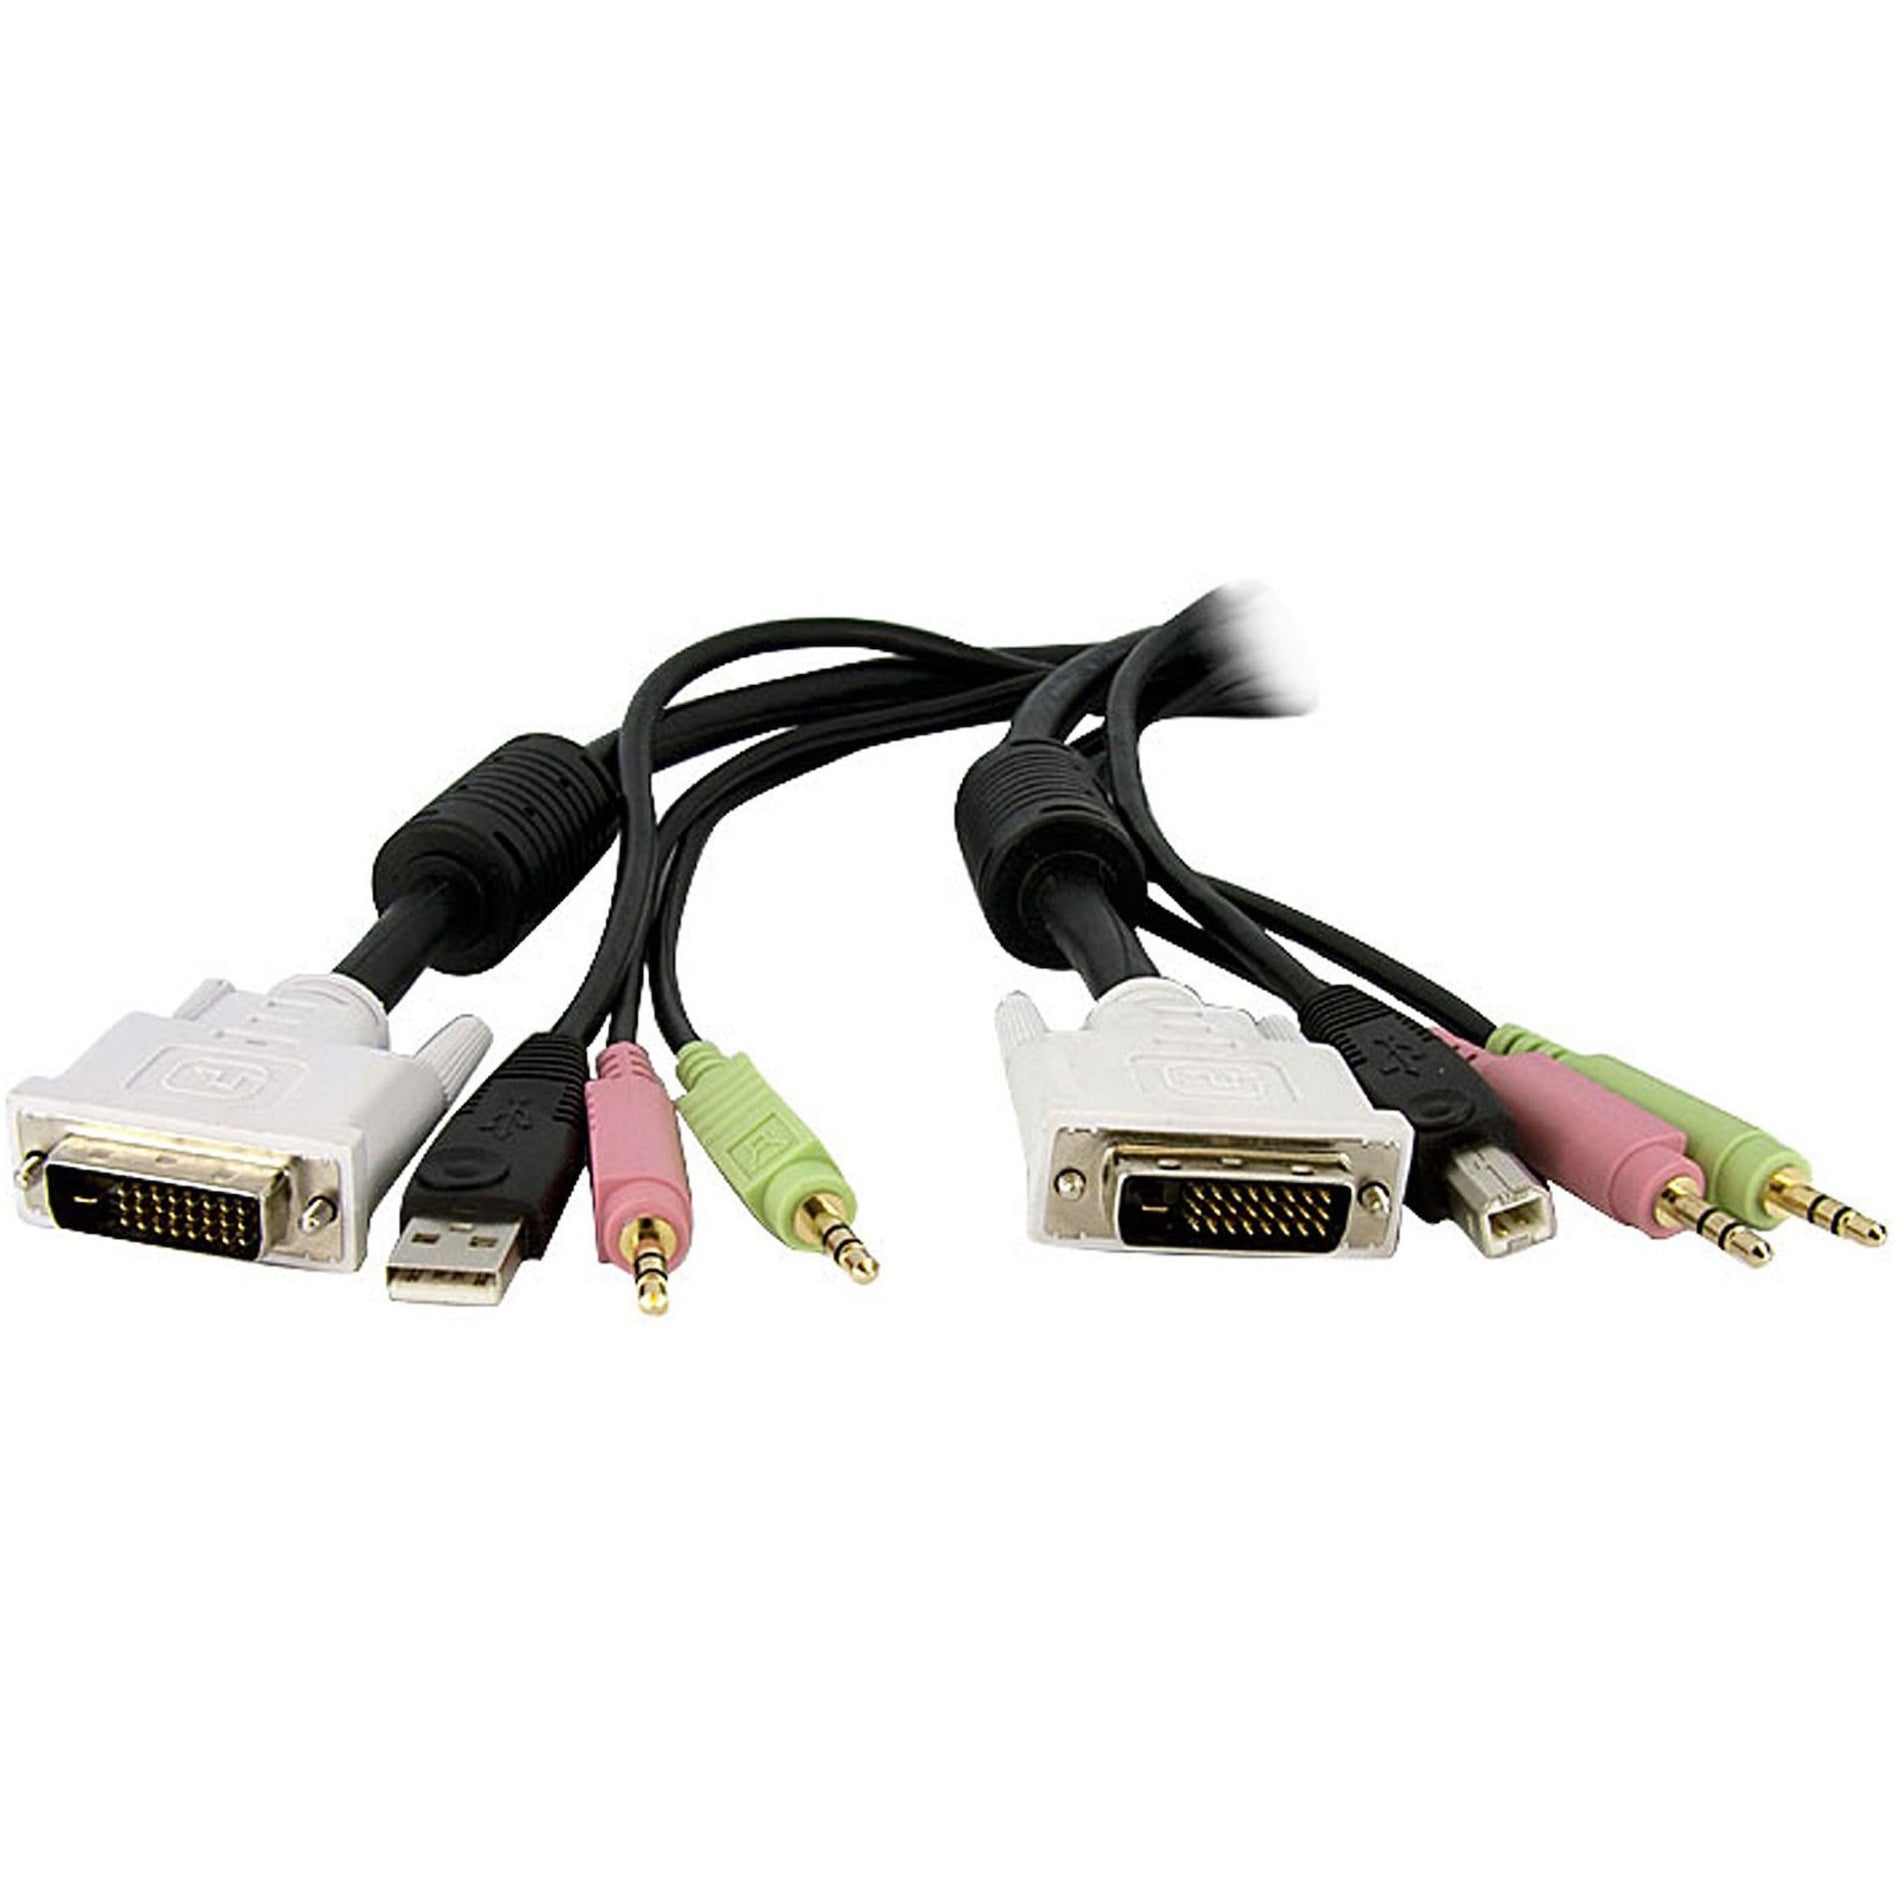 StarTech.com DVID4N1USB15 15ft 4-in-1 USB Dual Link DVI-D KVM Switch Cable with Audio & Microphone, Copper Conductor, 7.9 Gbit/s Data Transfer Rate